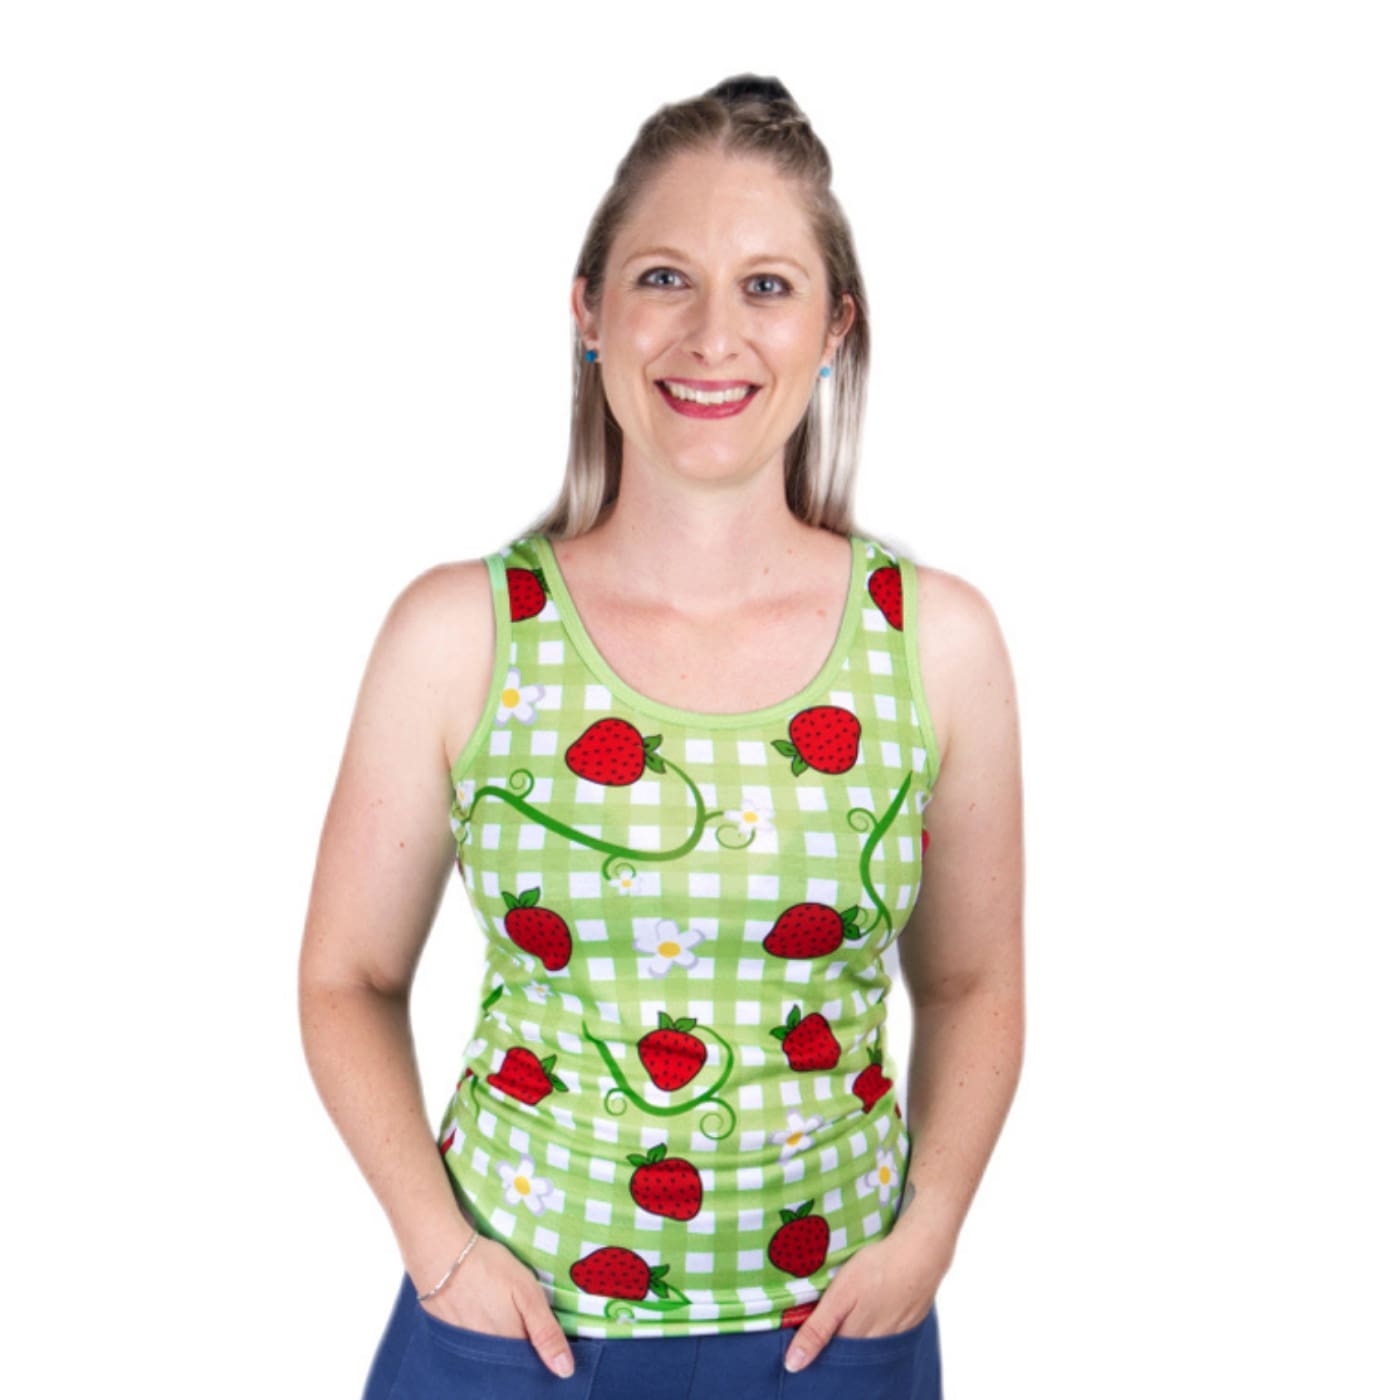 Berry Picnic Singlet Top by RainbowsAndFairies.com.au (Strawberry Shortcake - Green Gingham - Tank Top - Vintage Inspired - Kitsch - Red) - SKU: CL_SGLET_BPCNC_ORG - Pic-04